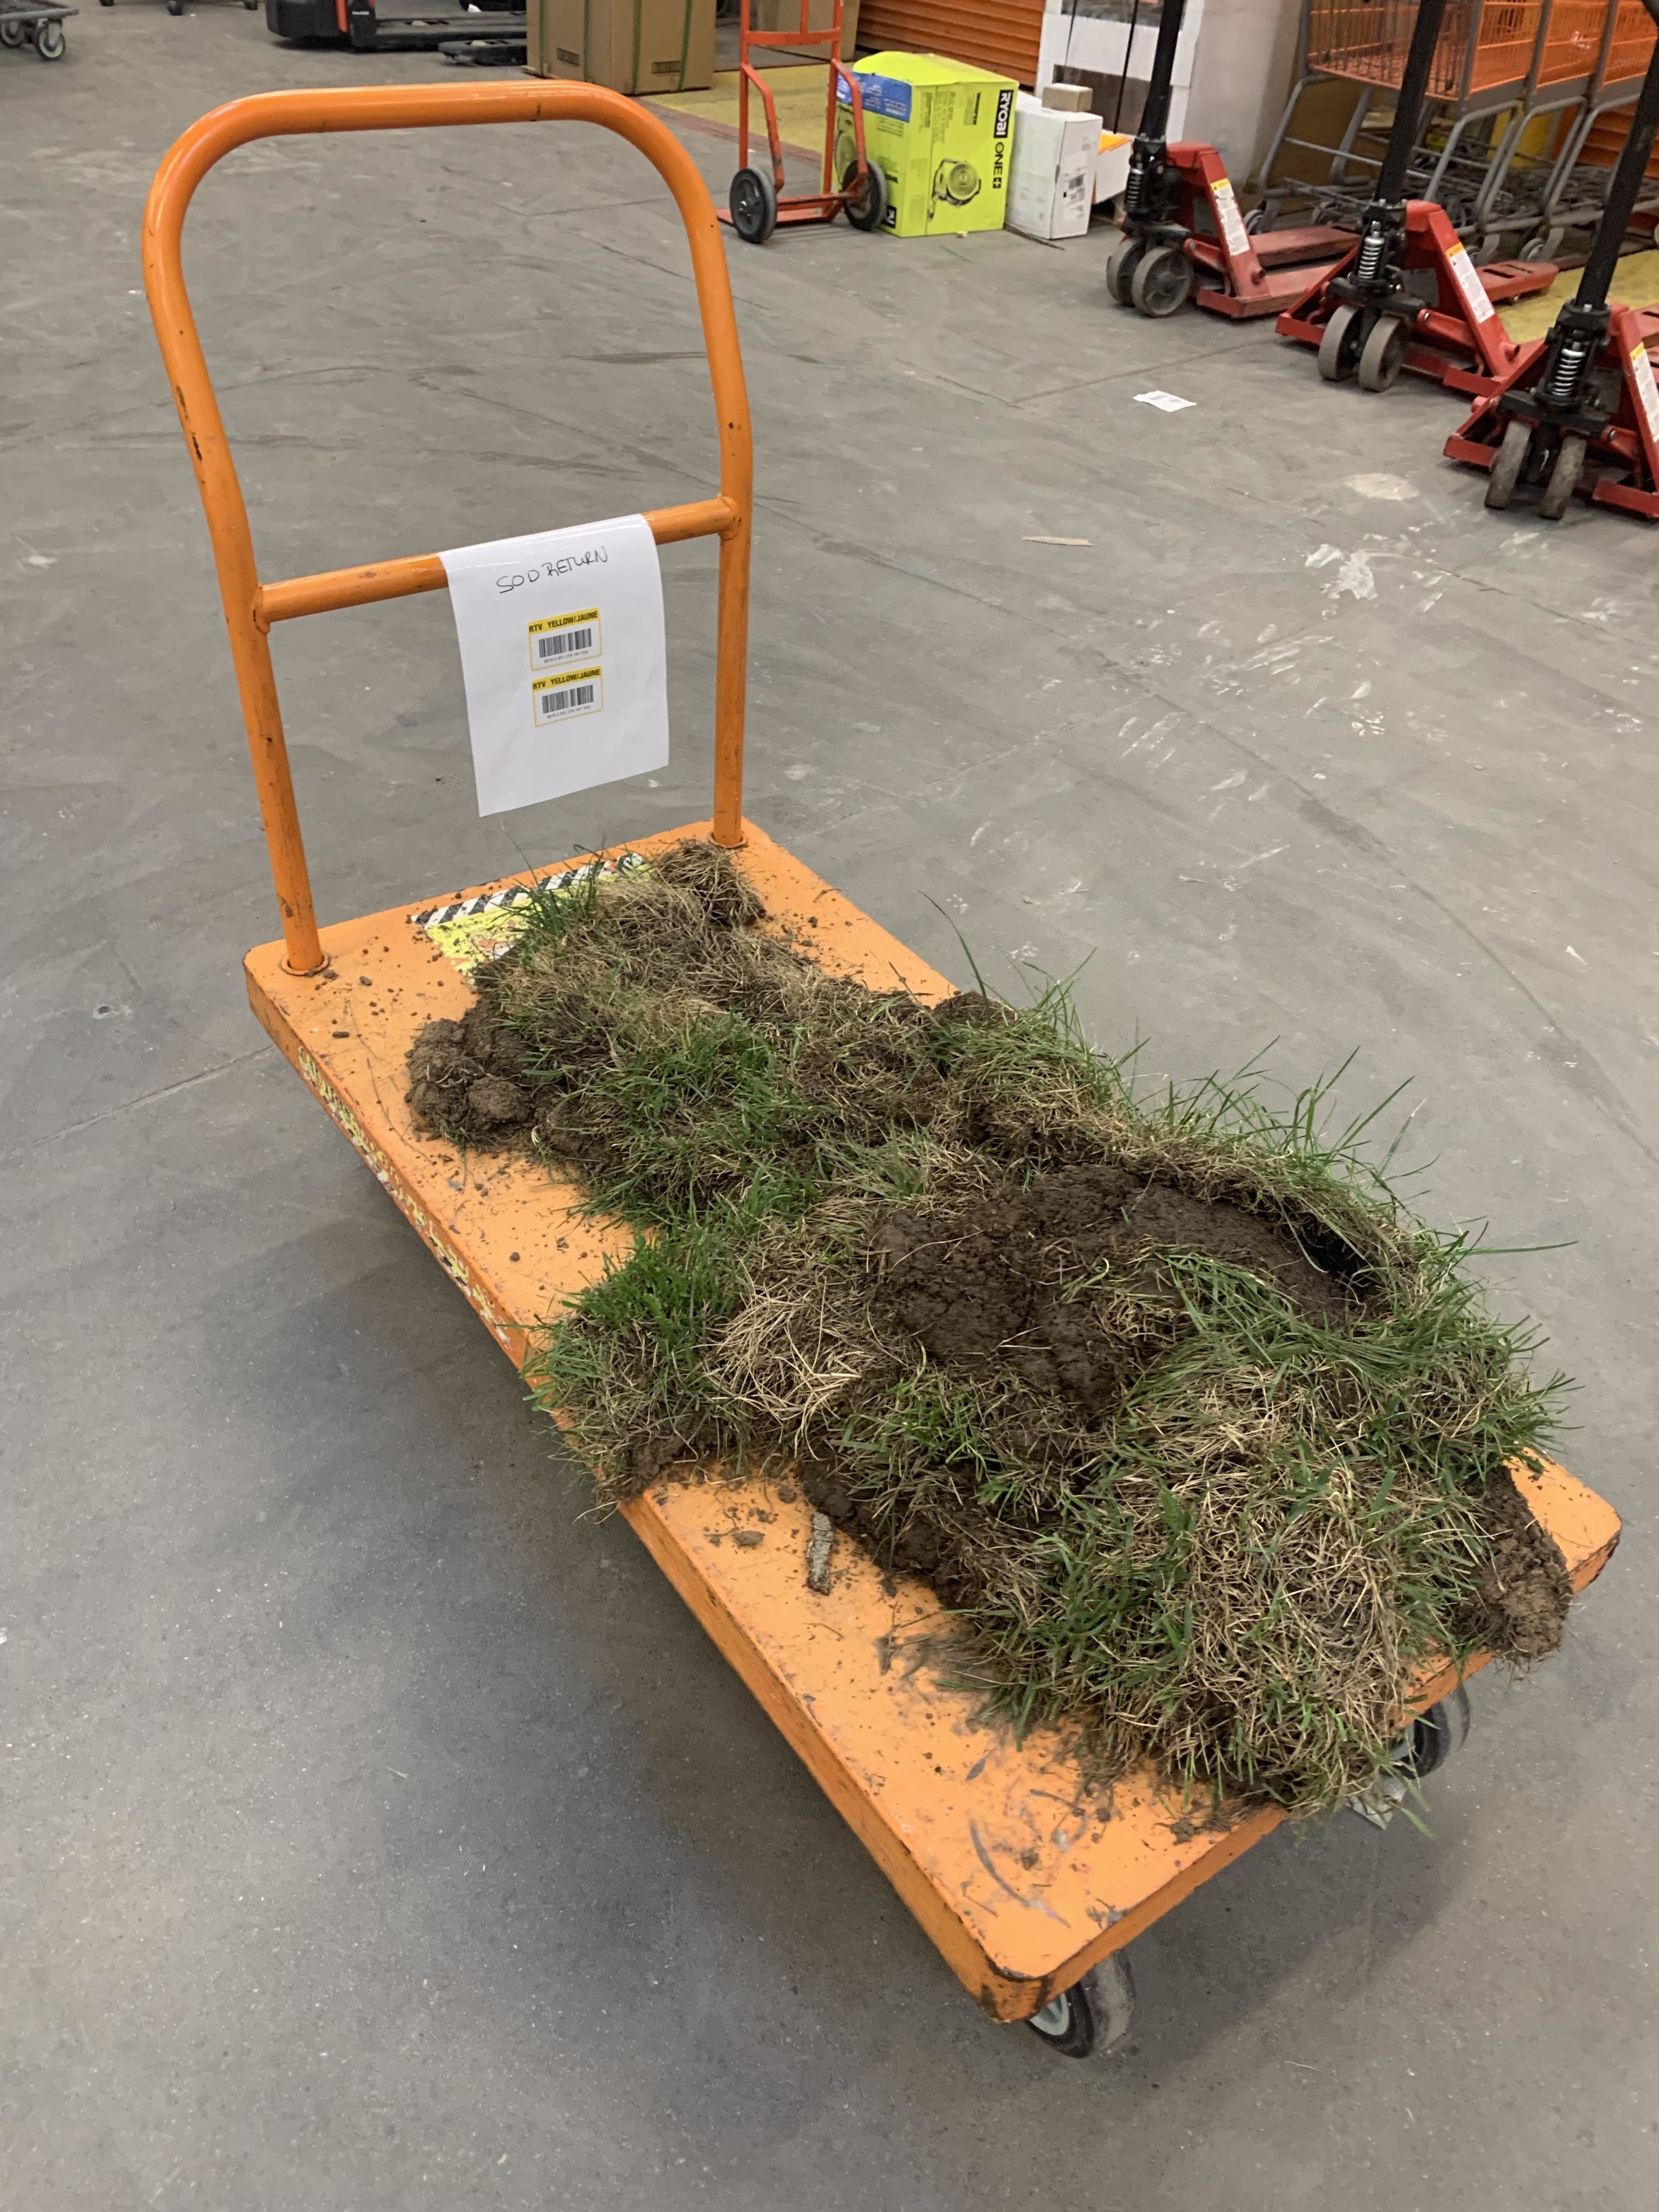 Orange flatbed cart loaded with a patch of soil and turf grass inside a store. Boxes and tools can be seen in the background